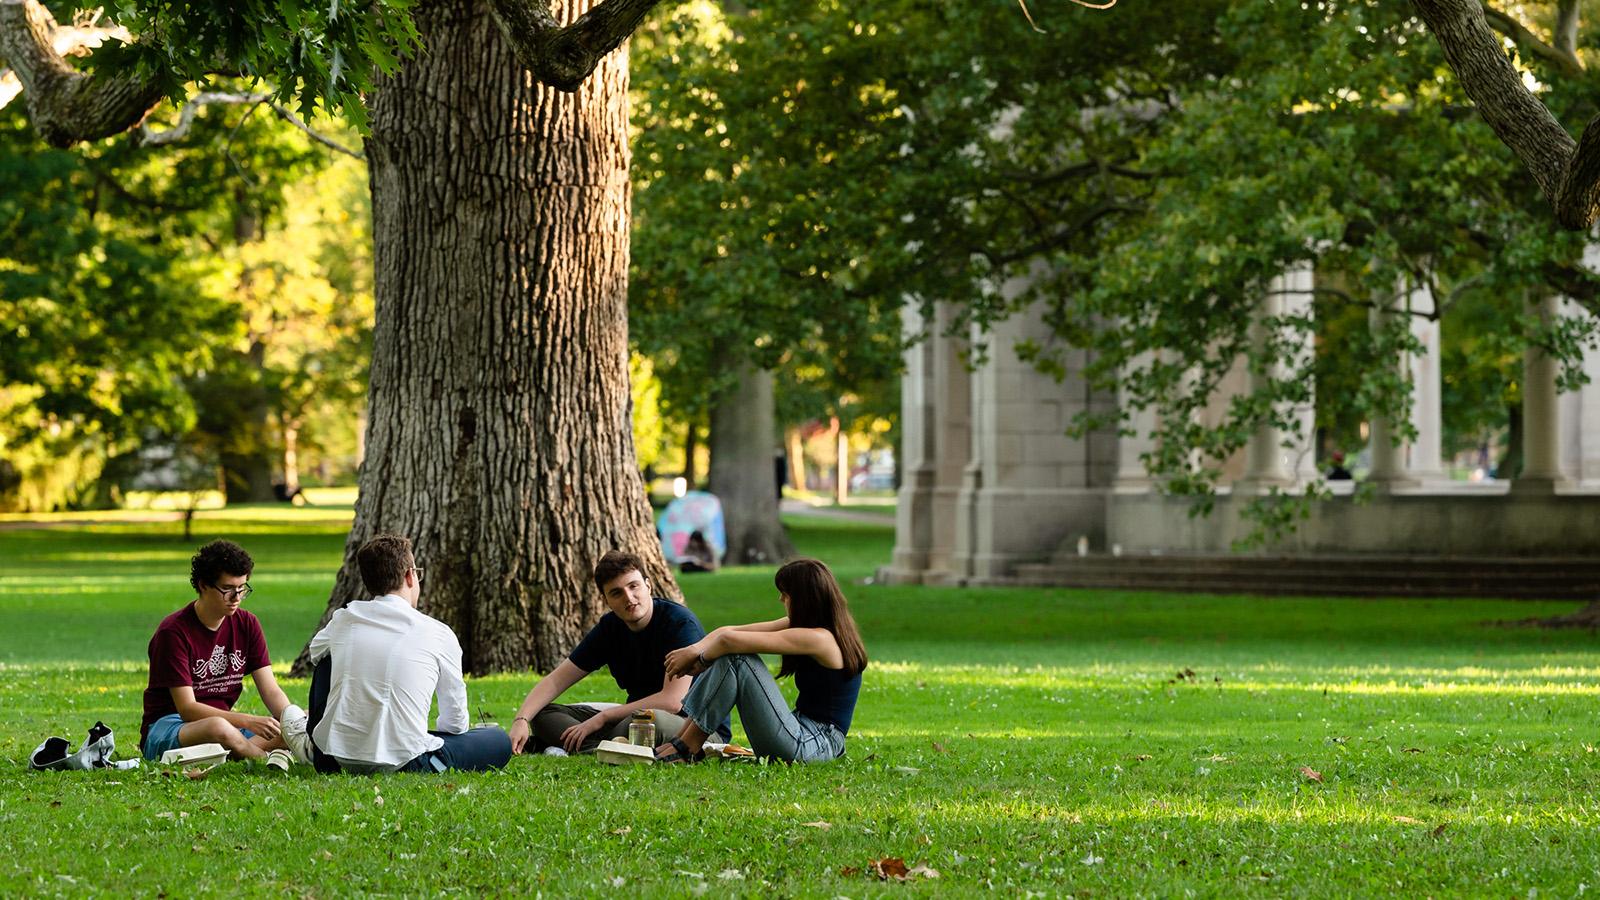 A small group of students sits in the grass under the shade of a large, old tree.